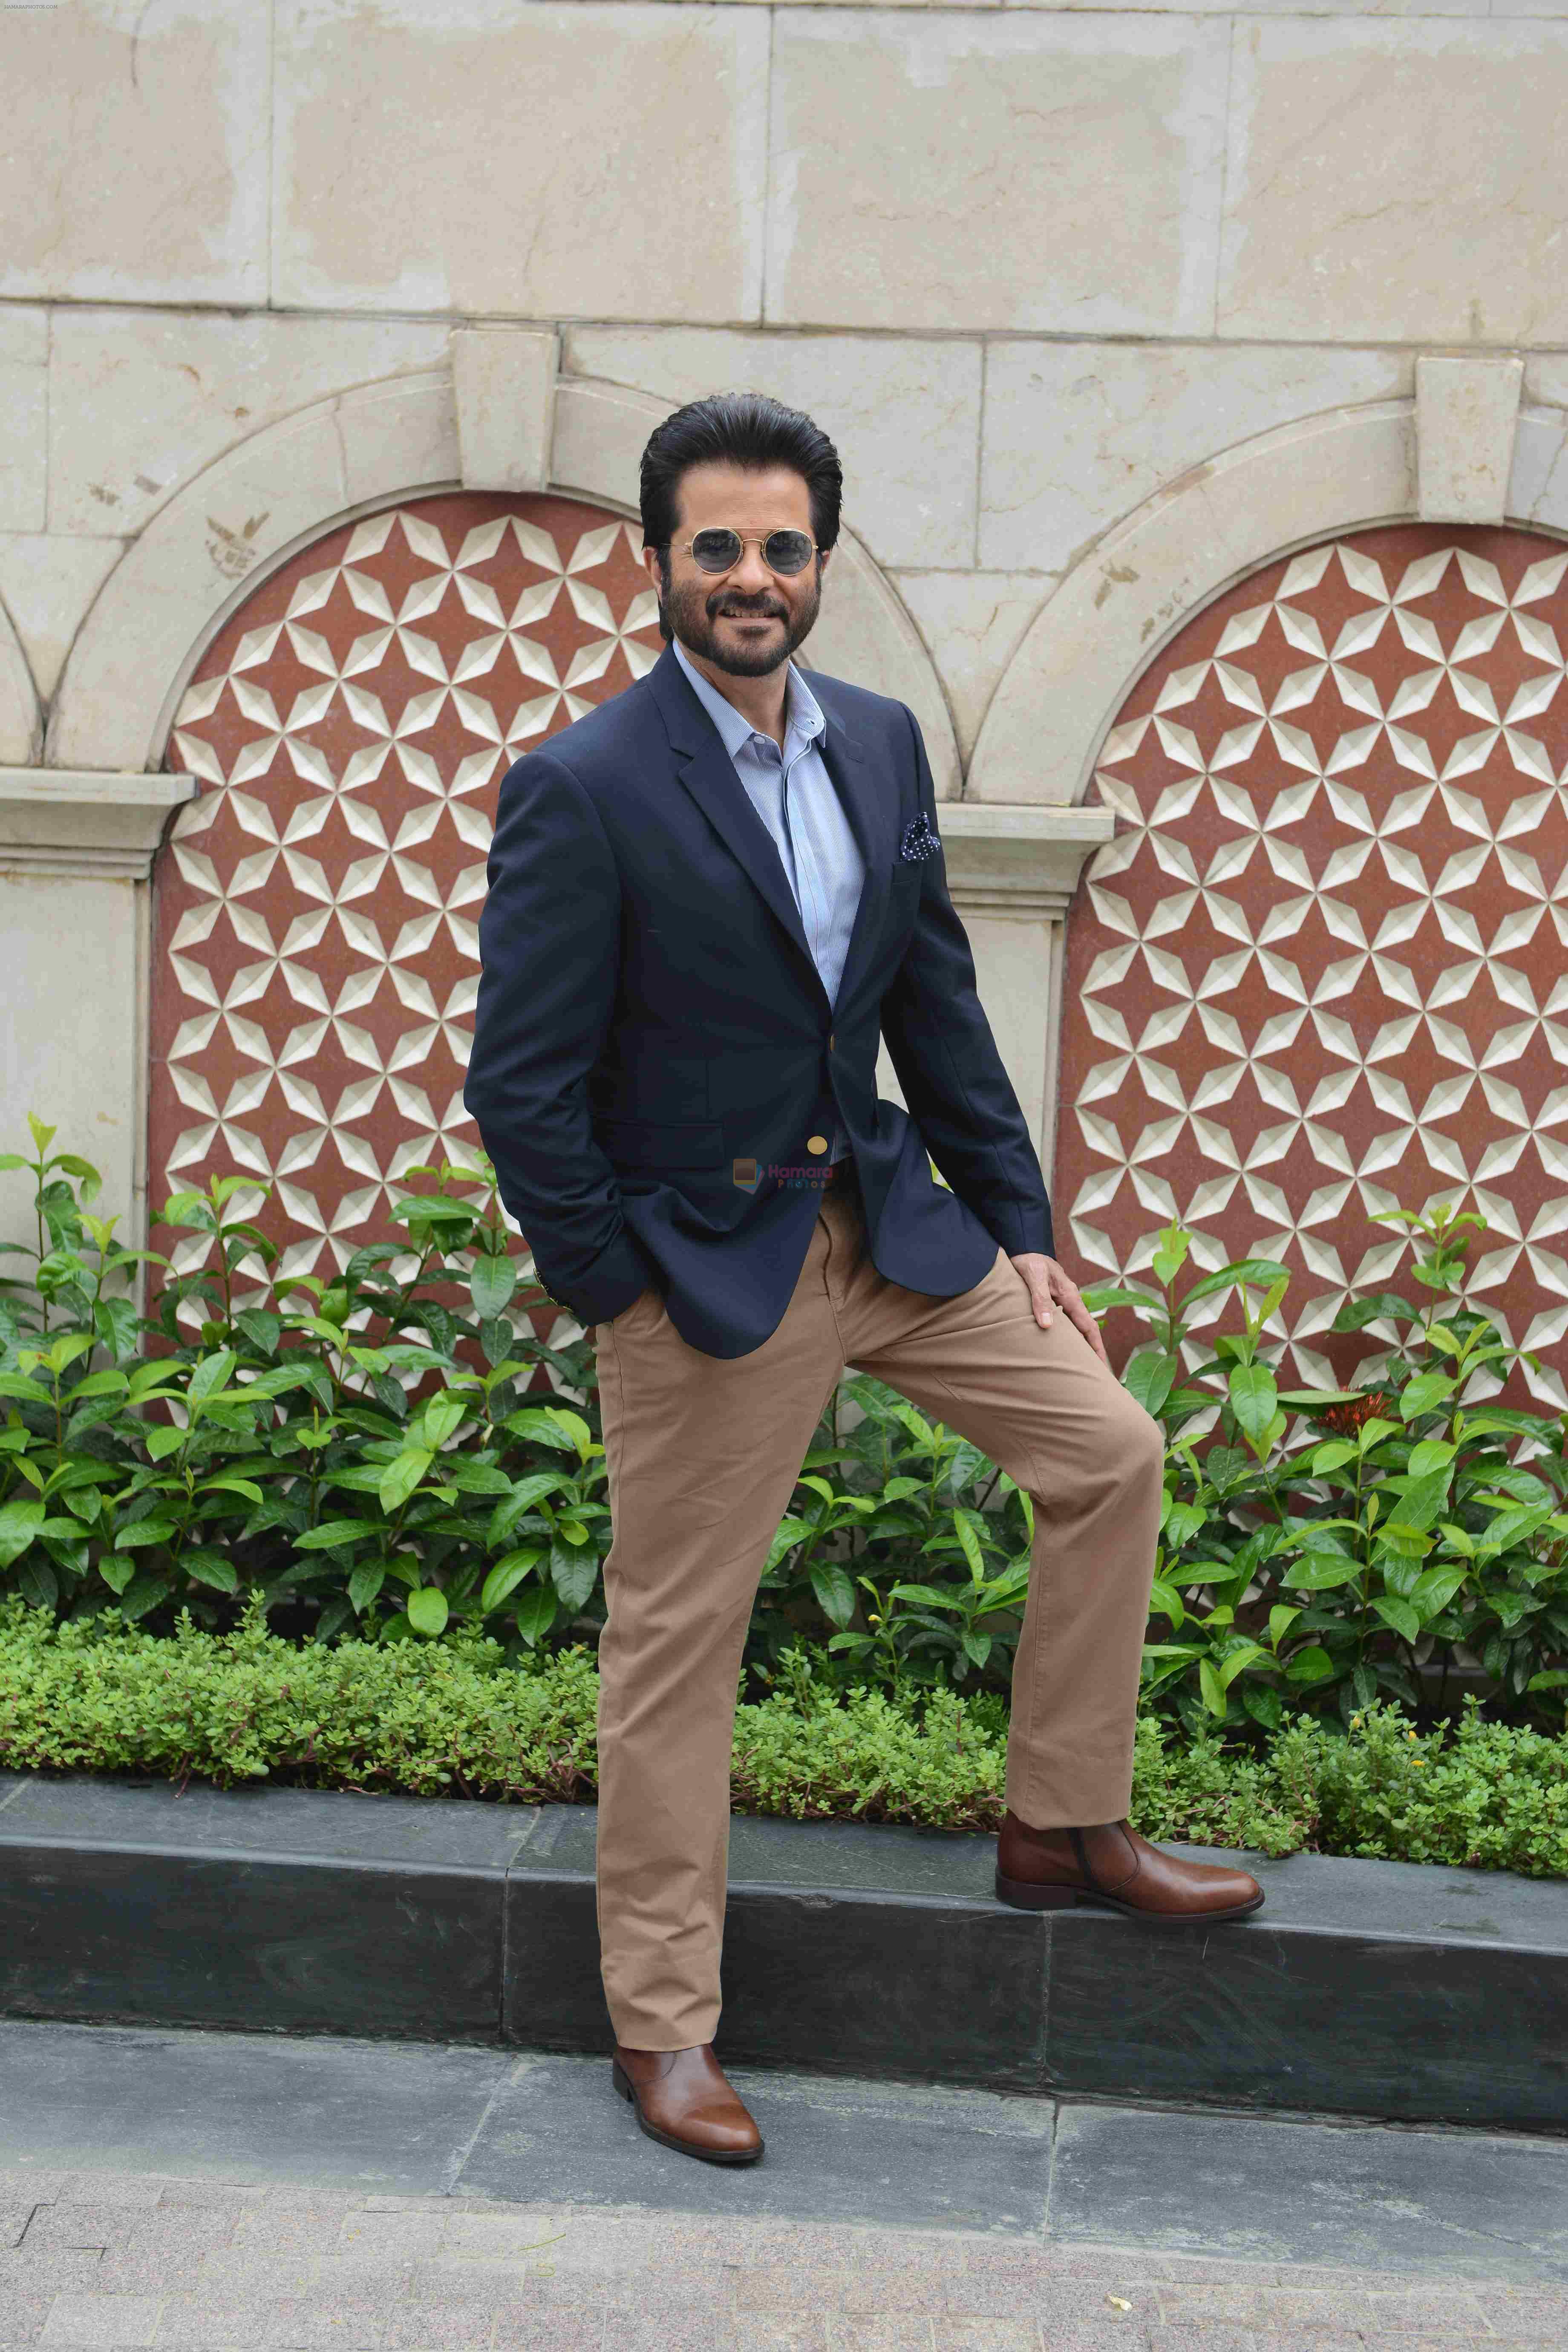 Anil Kapoor at 24 serial promotions in Mumbai on 8th July 2016